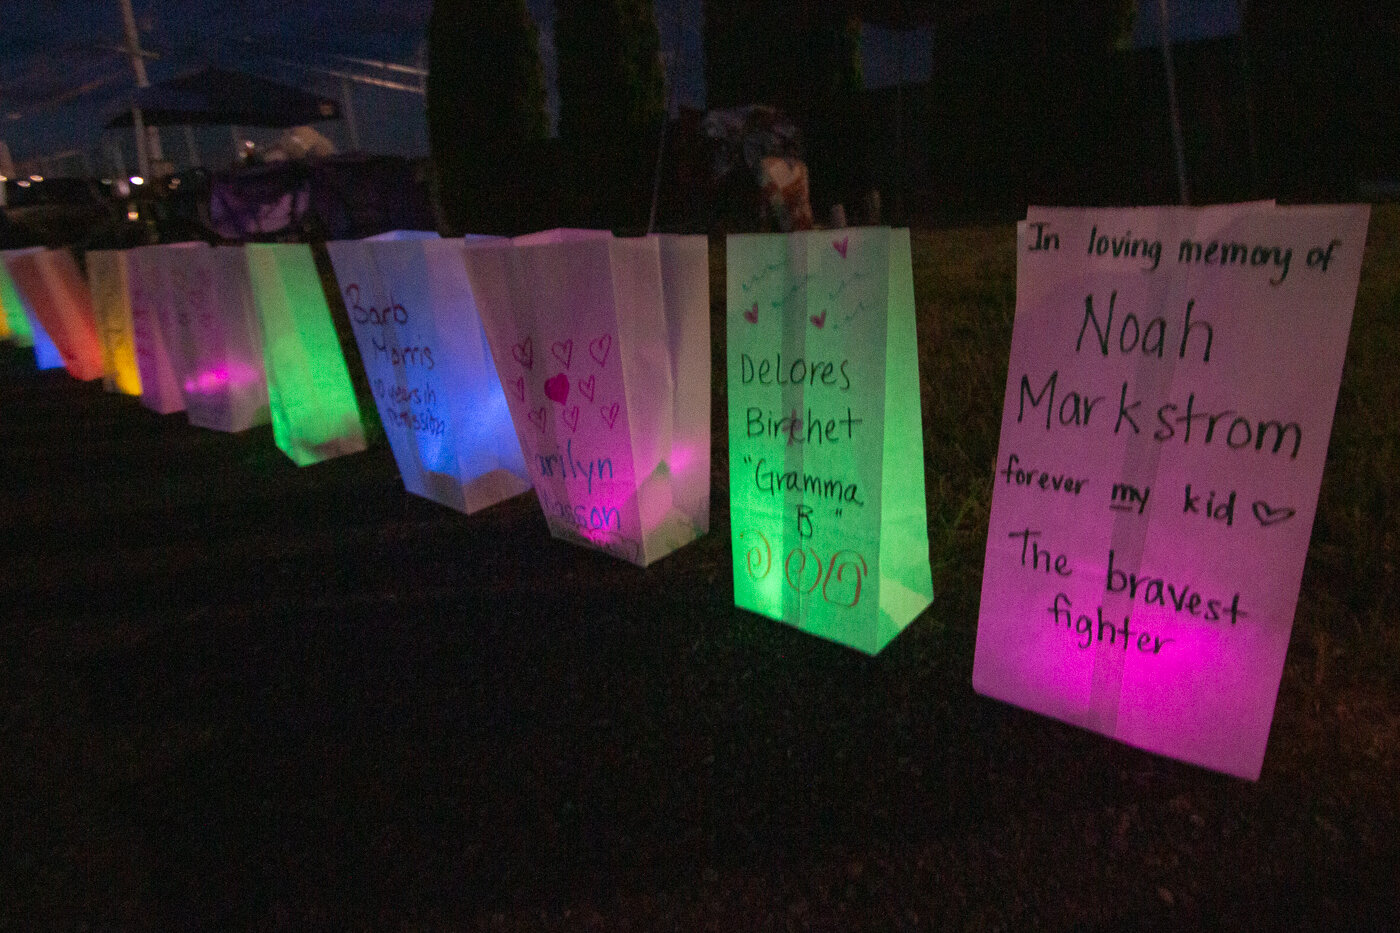 The final event of the American Cancer Society's Relay for Life on Saturday night was the luminaria walk. Each luminaria was dedicated to someone who had lost their life to cancer, someone currently fighting it or a cancer survivor.